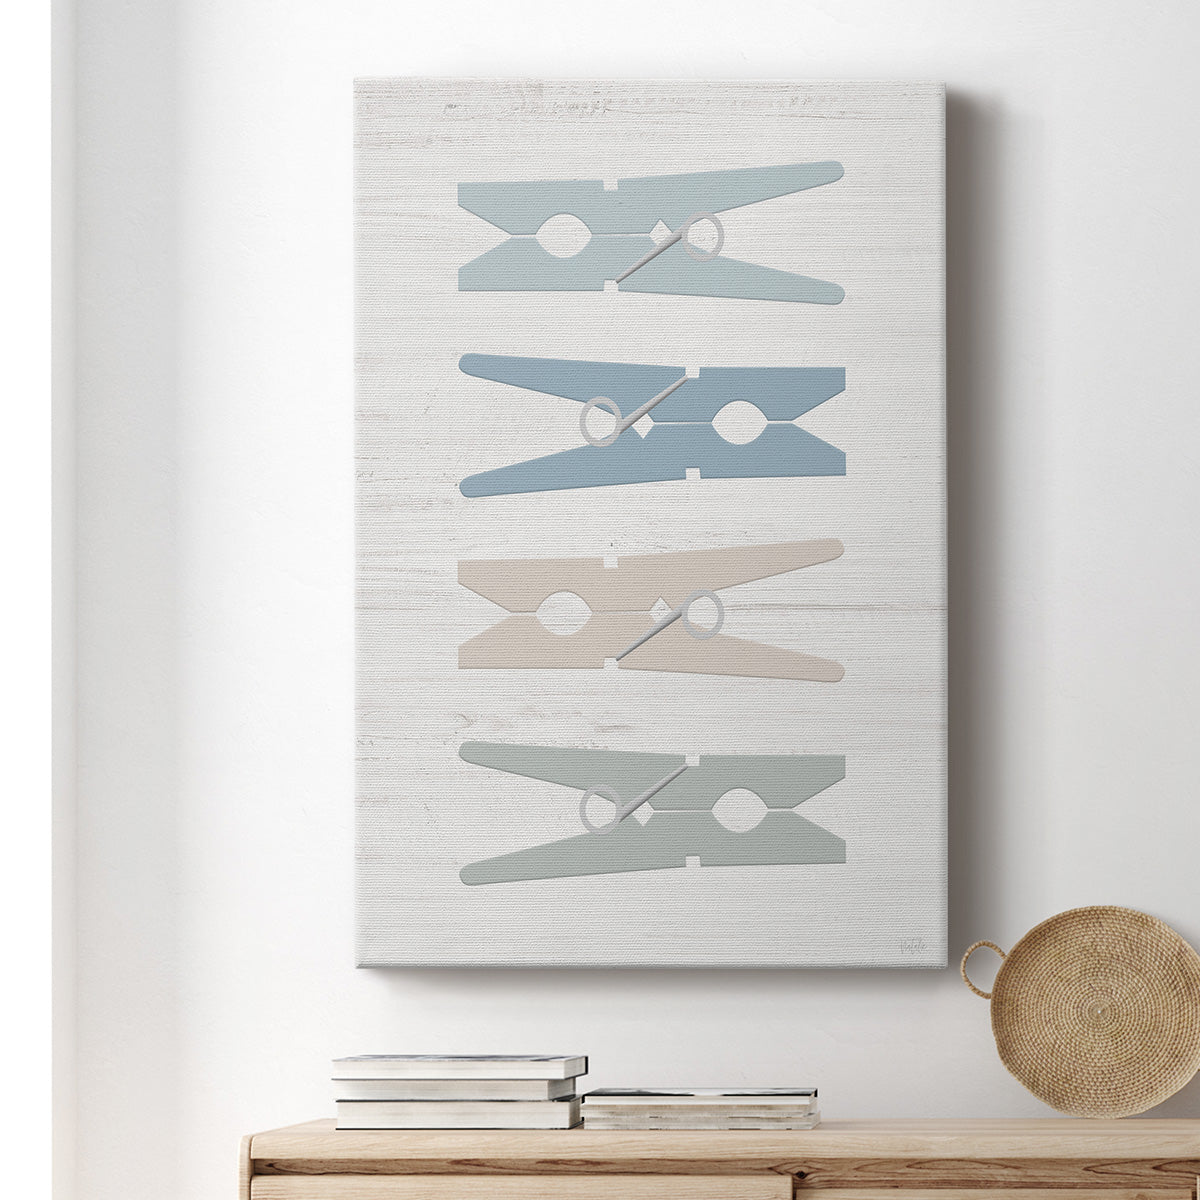 Laundry Pins Premium Gallery Wrapped Canvas - Ready to Hang